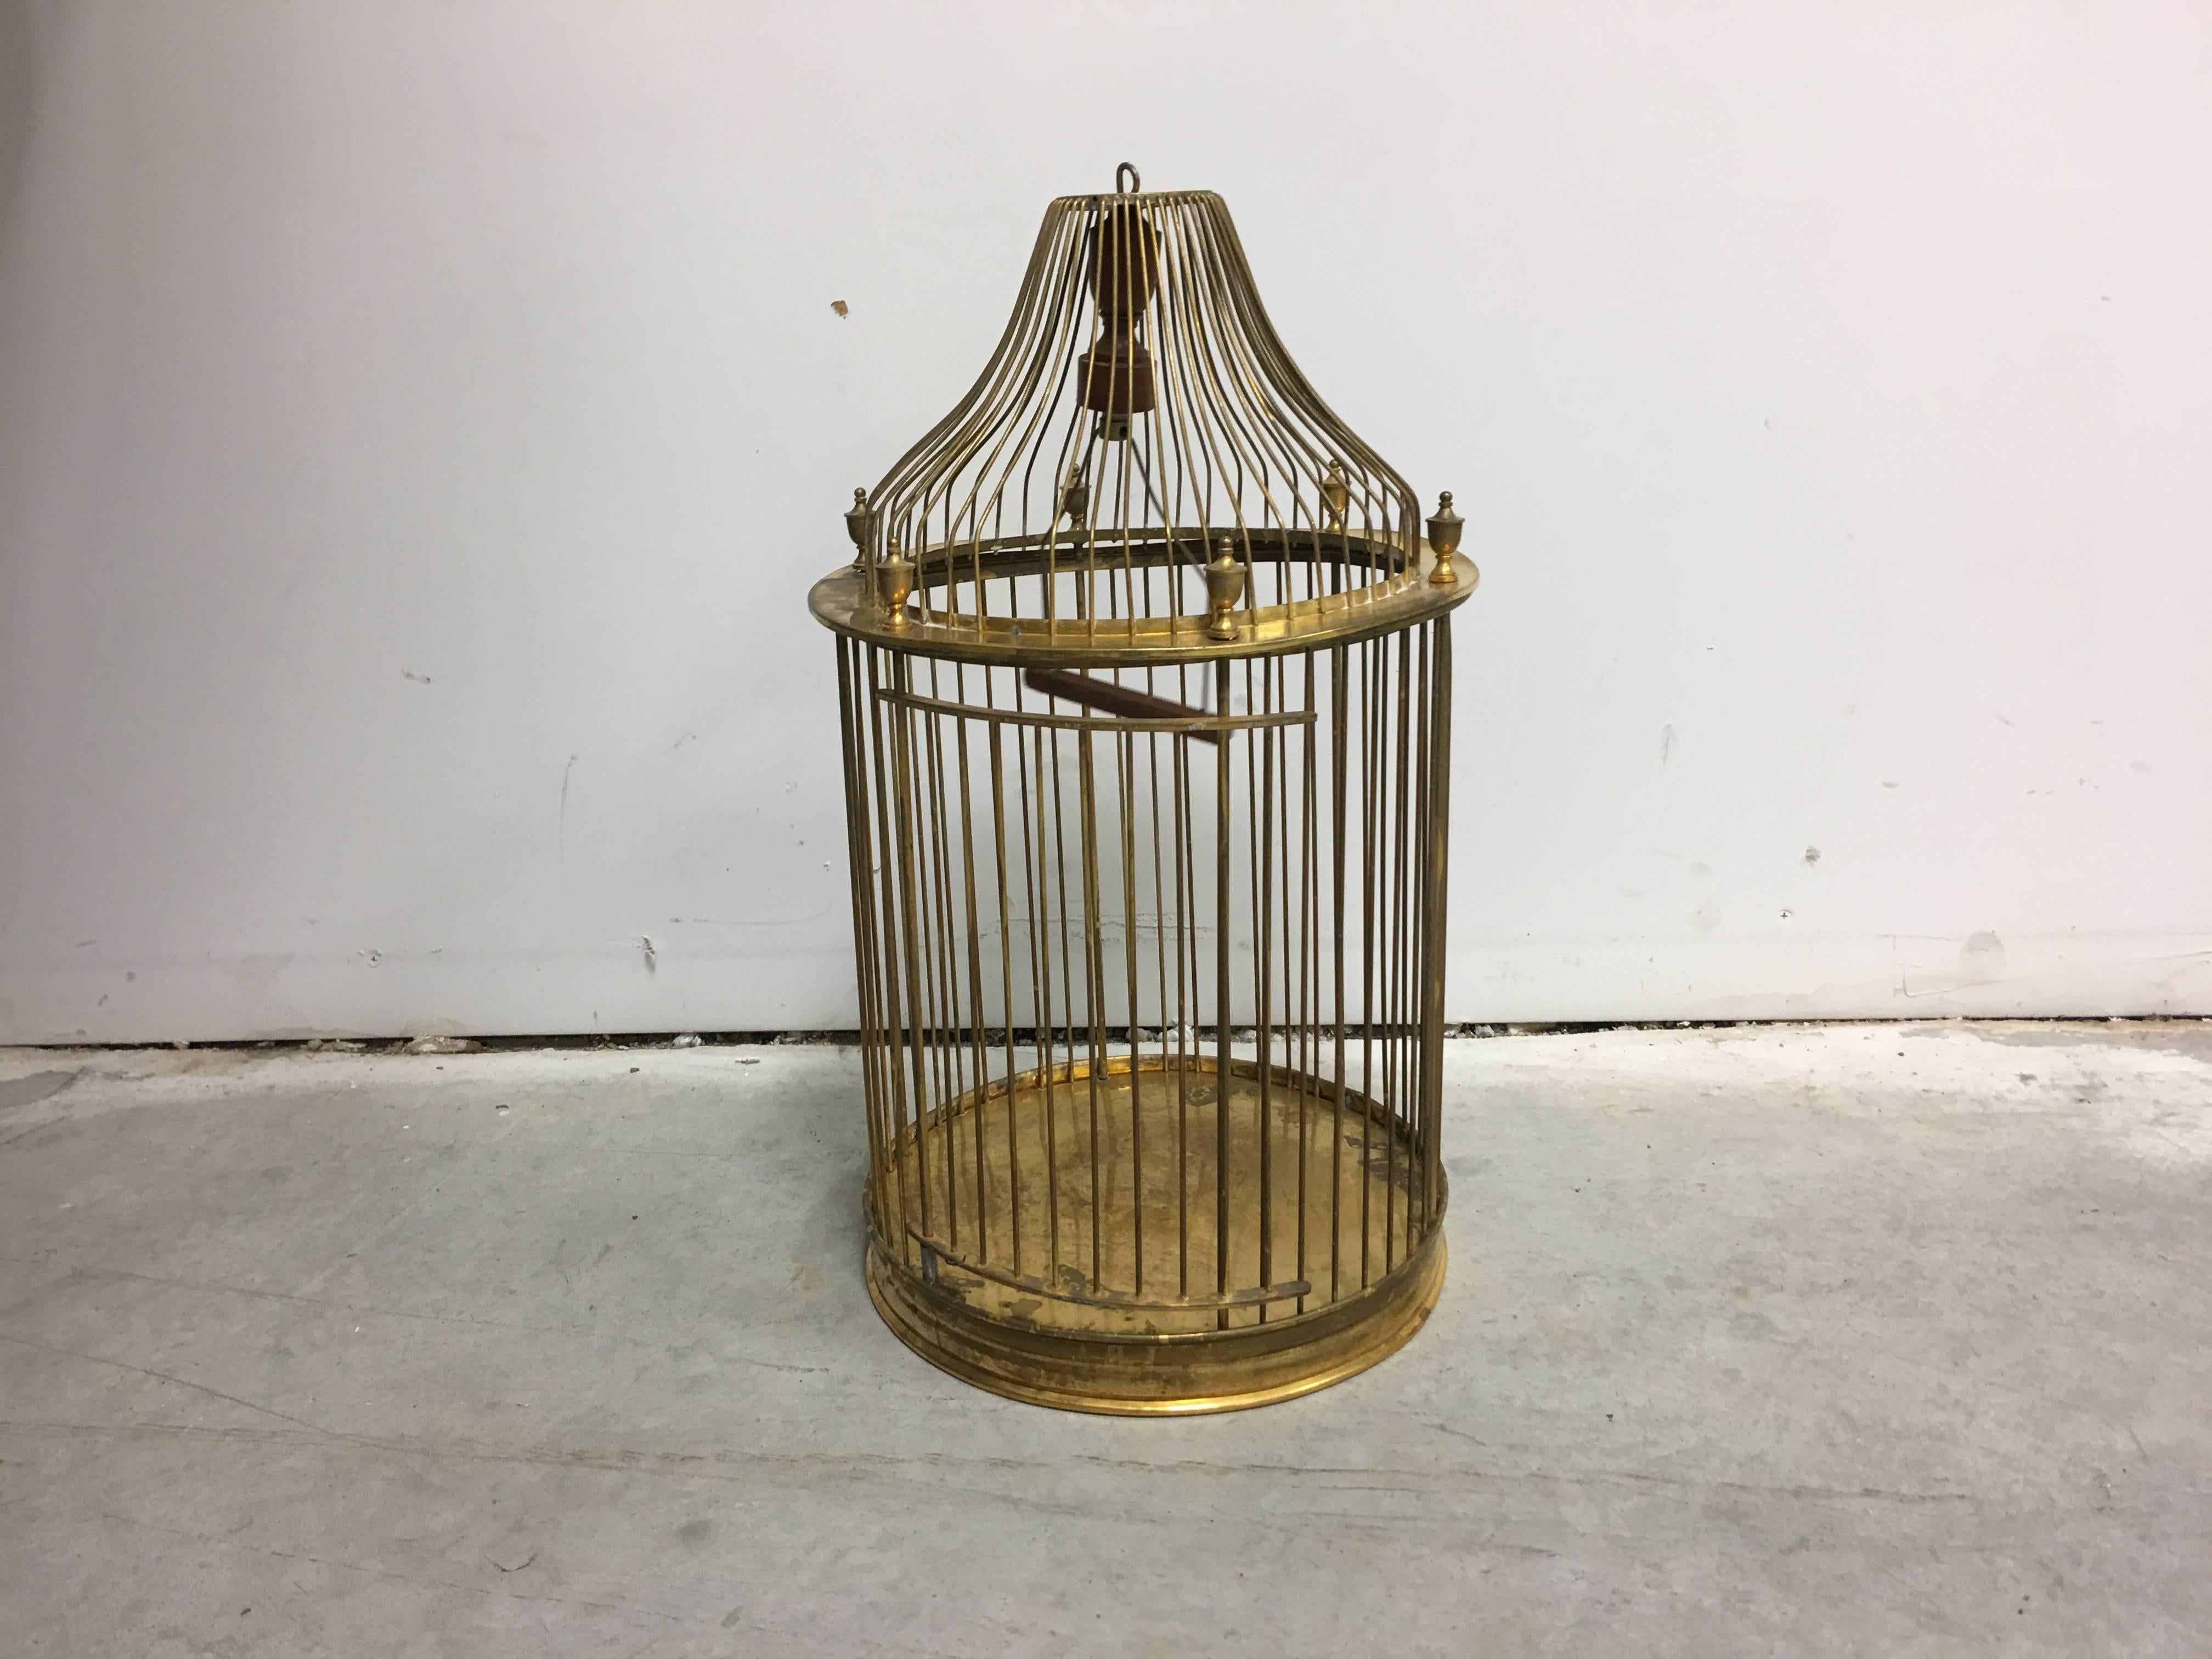 Offered is a beautiful, 1960s, Mid-Century Modern, brass birdcage with decorative finials and a hinged door.